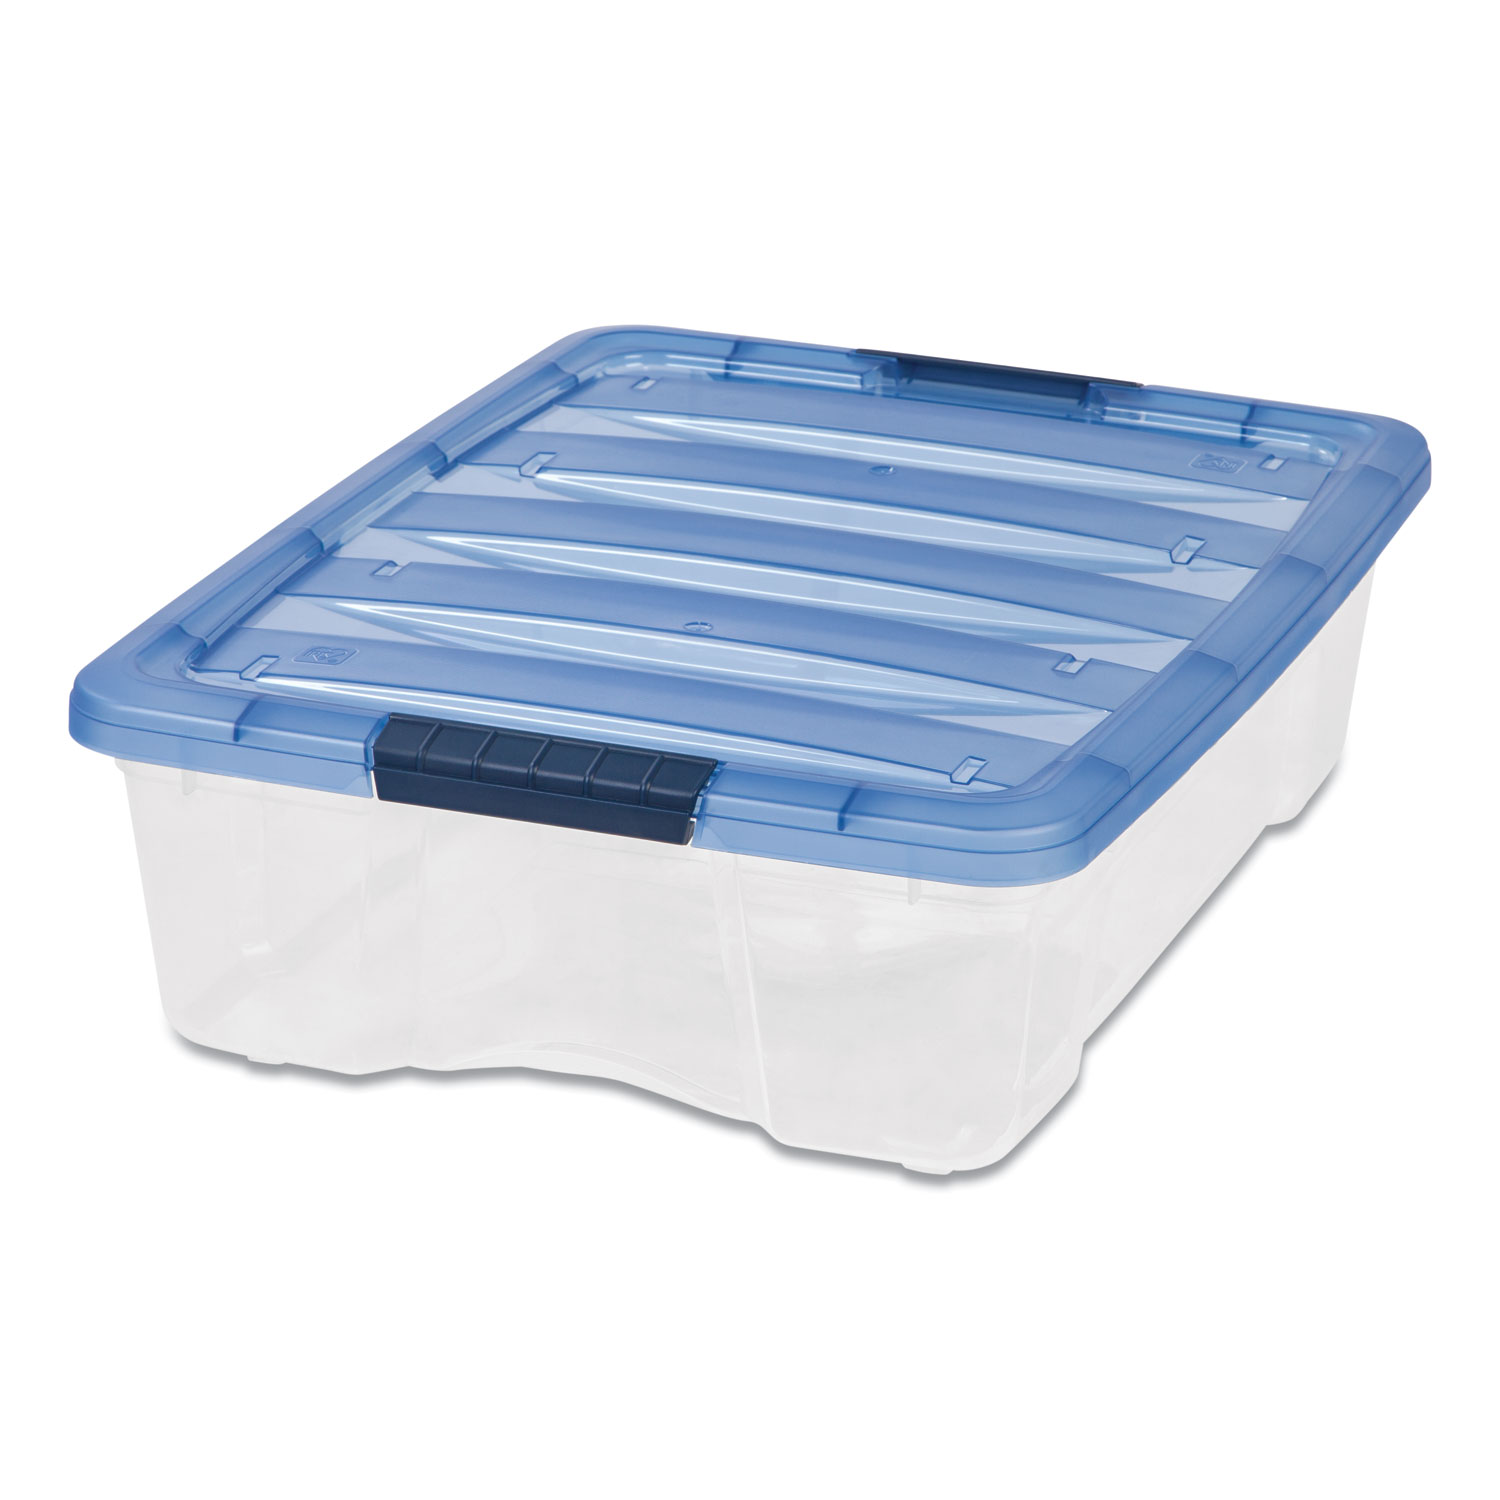  IRIS 100364 Stack and Pull Latching Flat Lid Storage Box, 6.73 gal, 16.5 x 22 x 6.5, Clear/Translucent Blue (IRS1560564) 